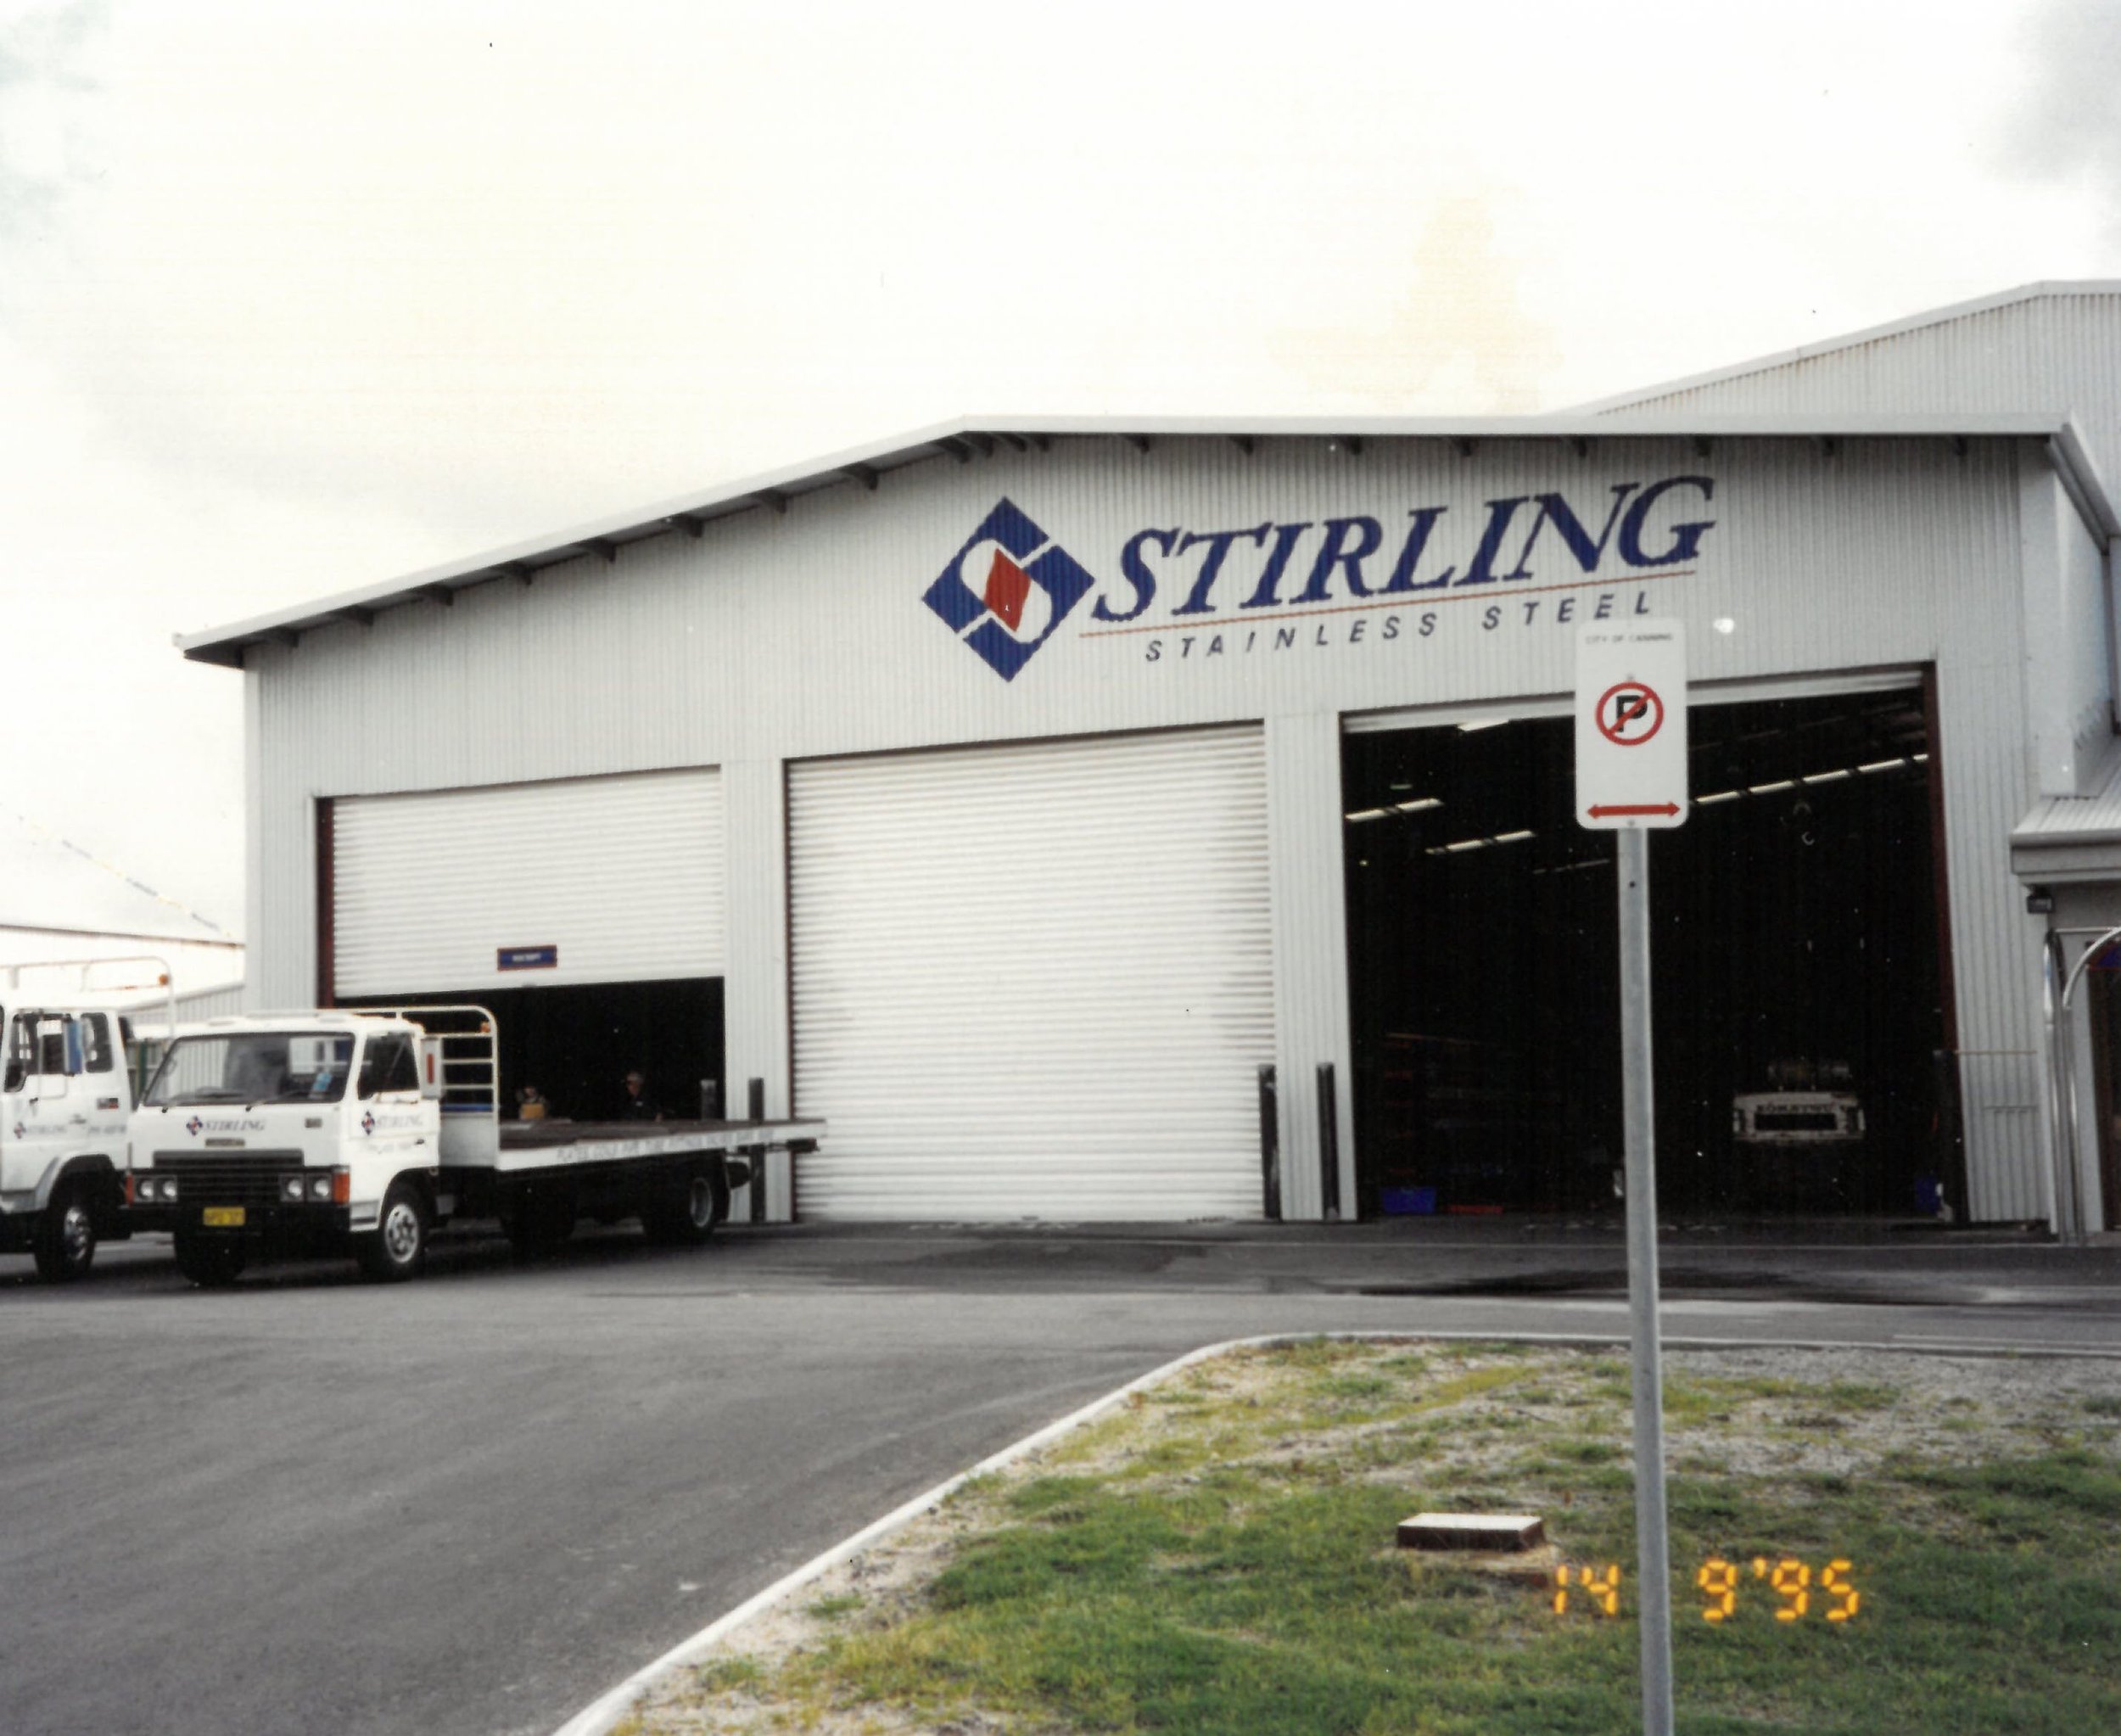 Name change from Stirling Metals to Stirling Stainless Steel 